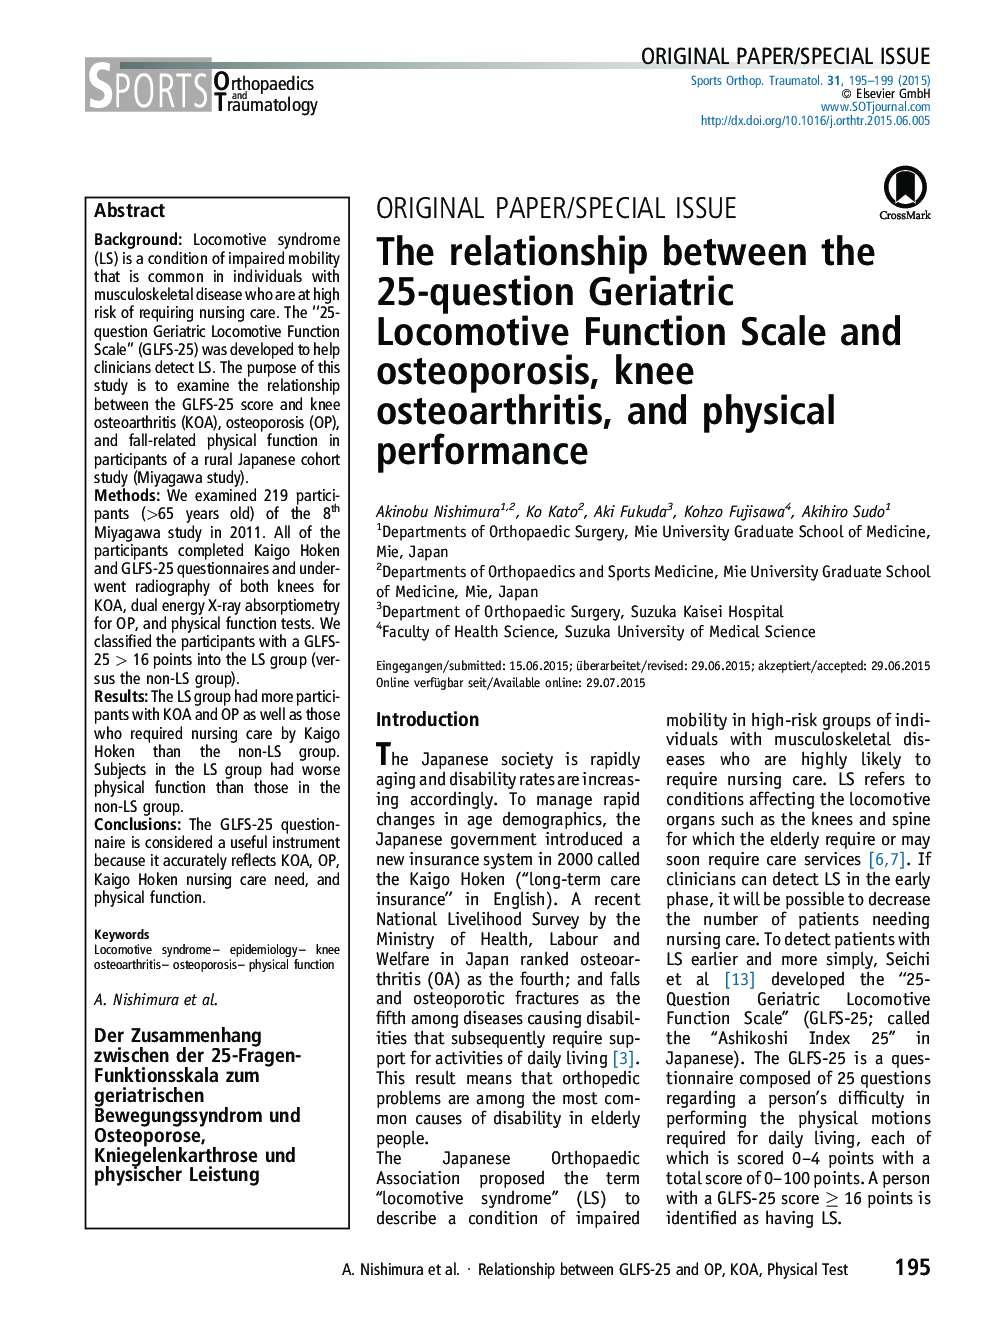 The relationship between the 25-question Geriatric Locomotive Function Scale and osteoporosis, knee osteoarthritis, and physical performance